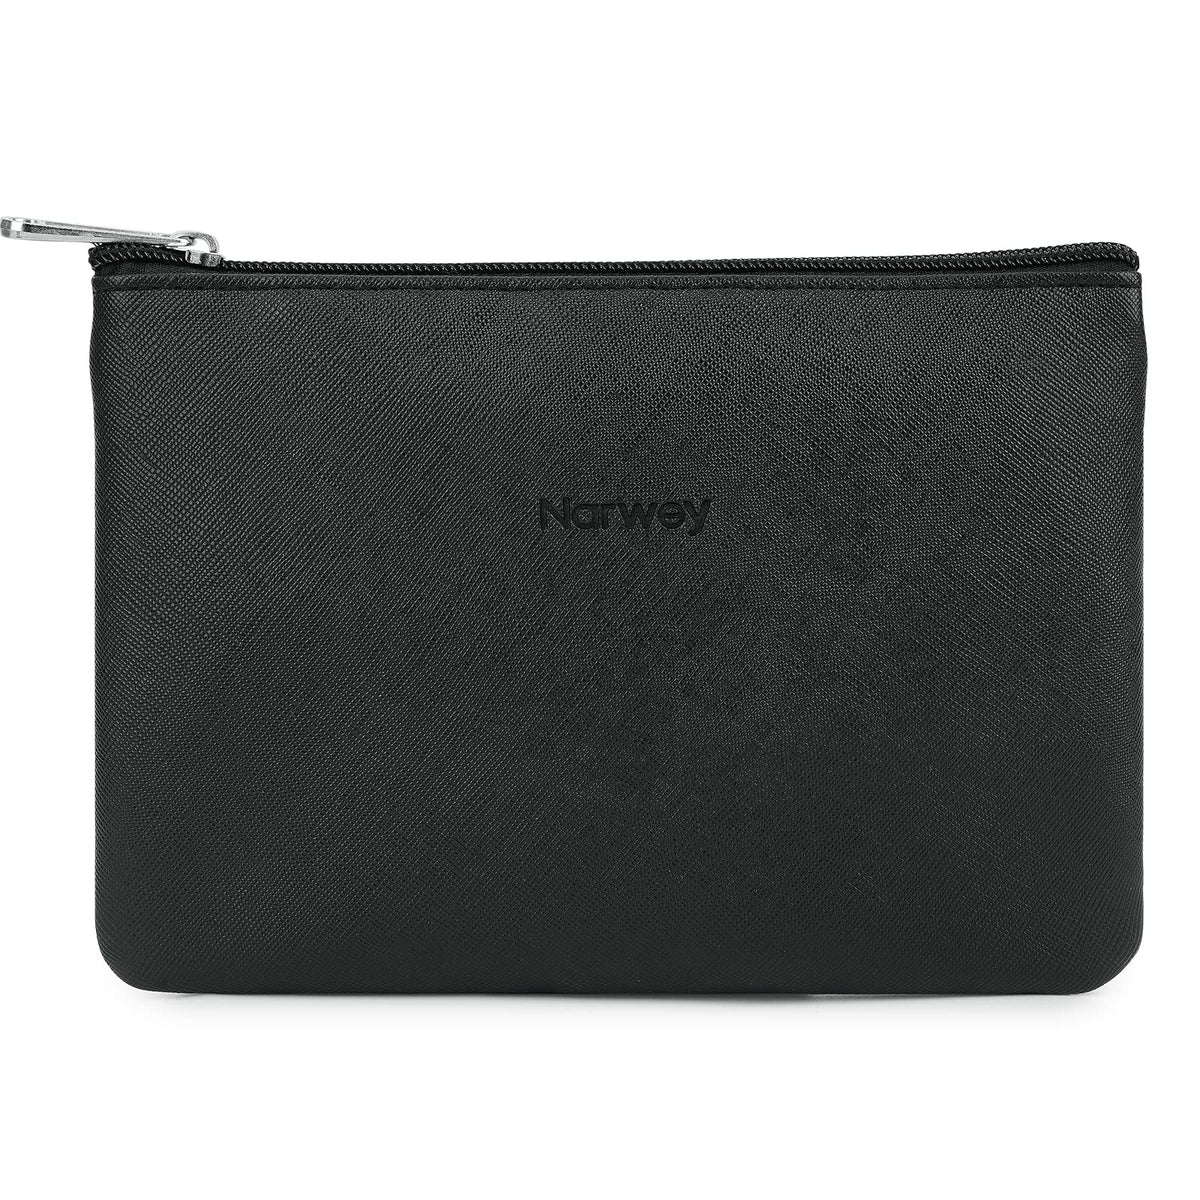 Cheap NW5038 Vegan Leather Make-up Travel Cosmetic Pouch sale